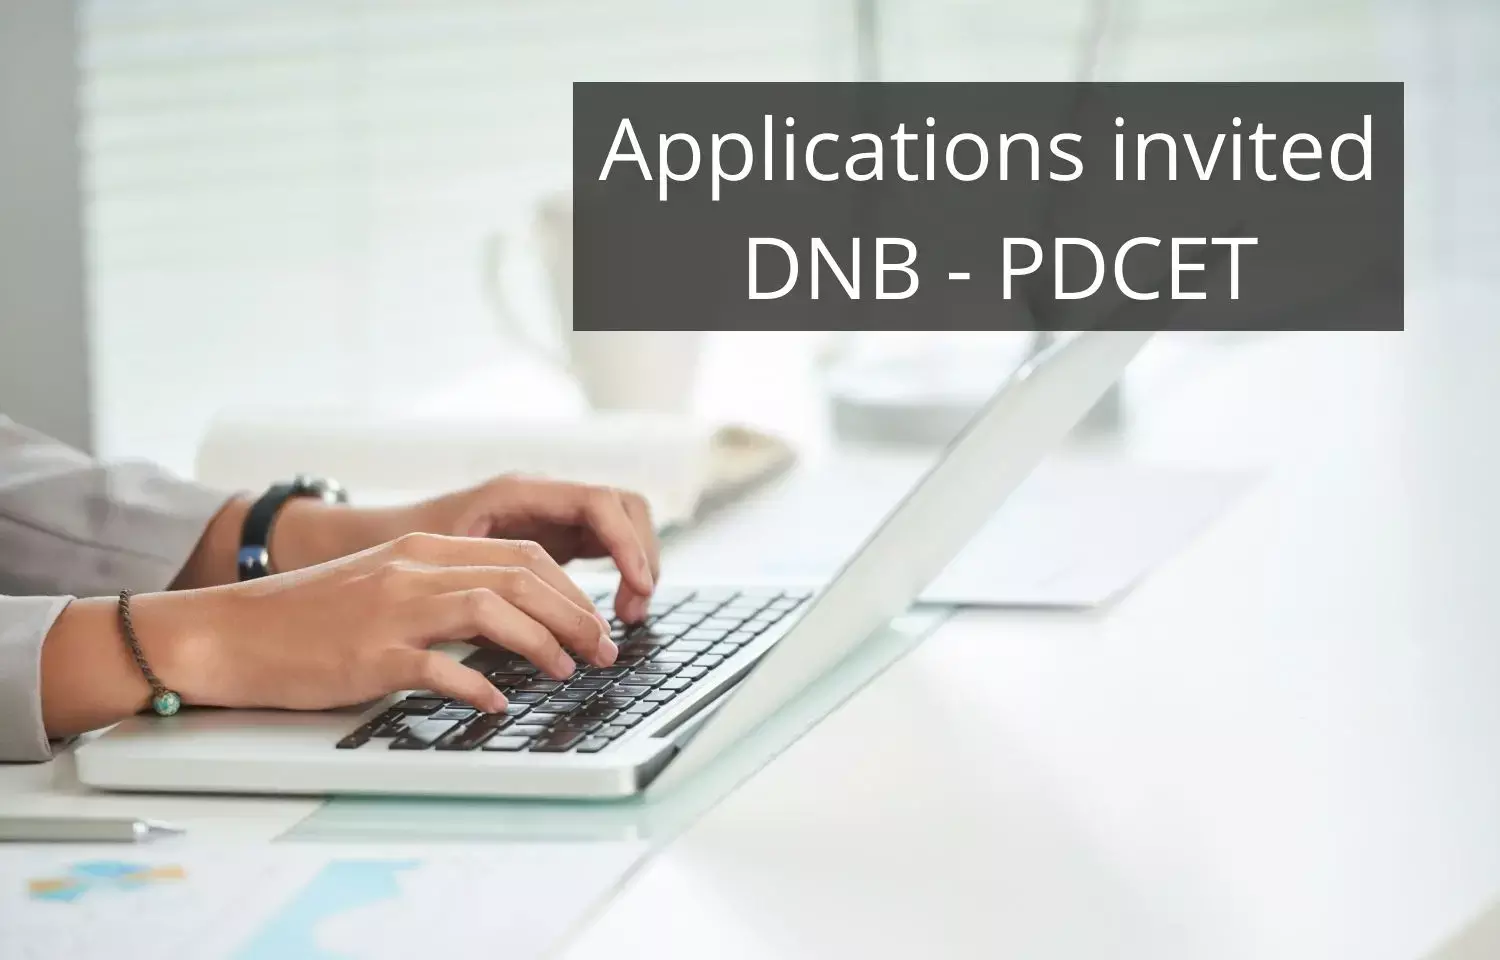 NBE invites online applications for DNB PDCET 2022